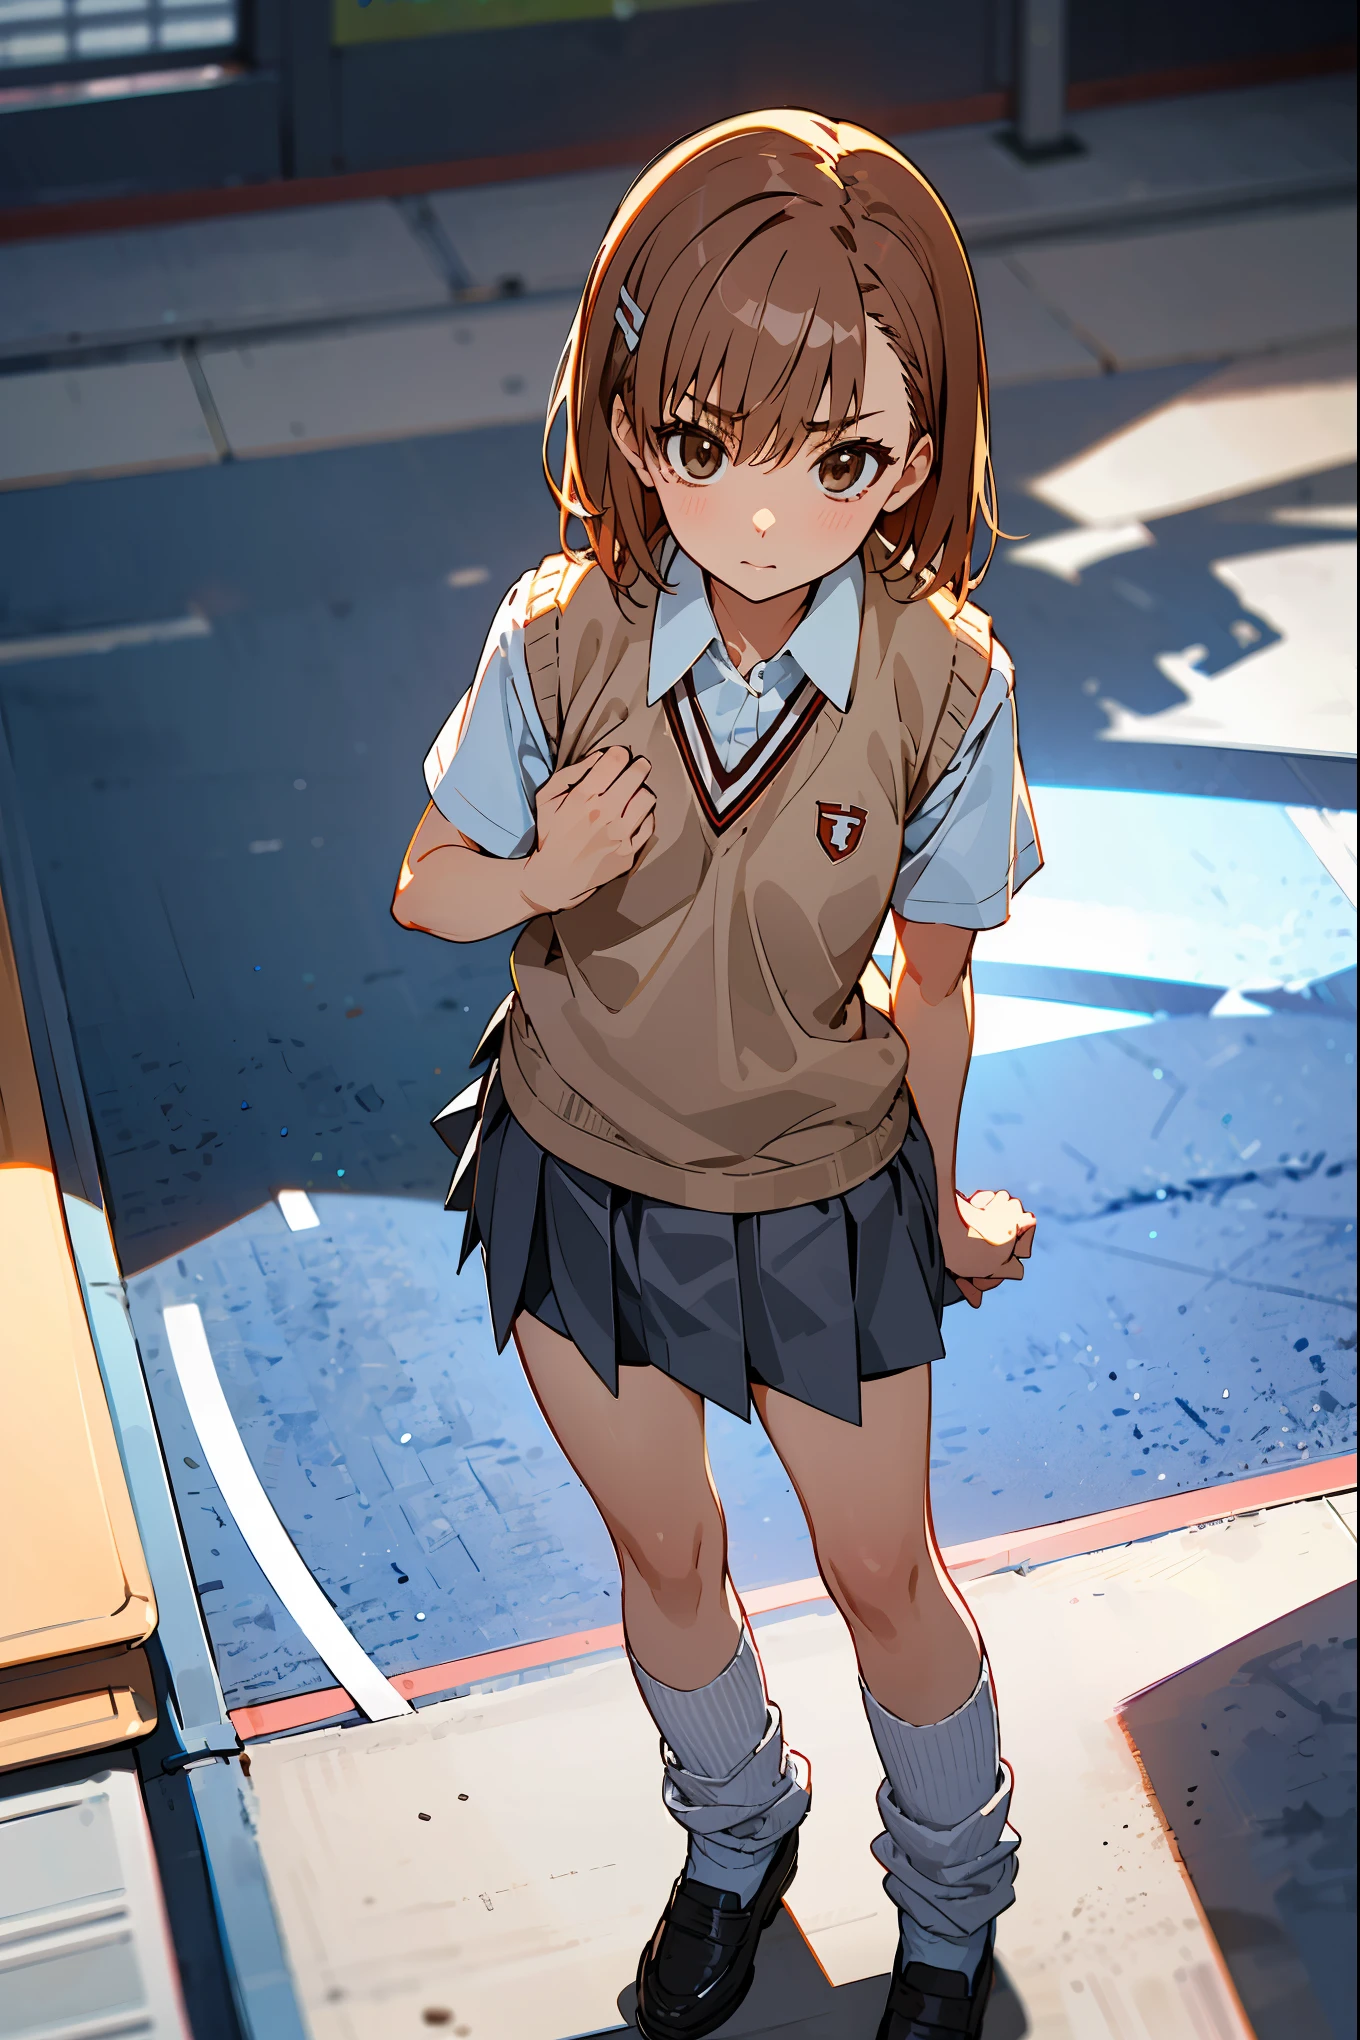  masterpiece,beste Quality, Misaka_mikoto,solo, brown eyess, Short_Hair, Small_Breast, looking at the viewers　Student uniforms, tokiwadai_School_uniform, whiteshirt, Sweater Vest, Gray miniskirt, , White loose socks, shoes, standing、